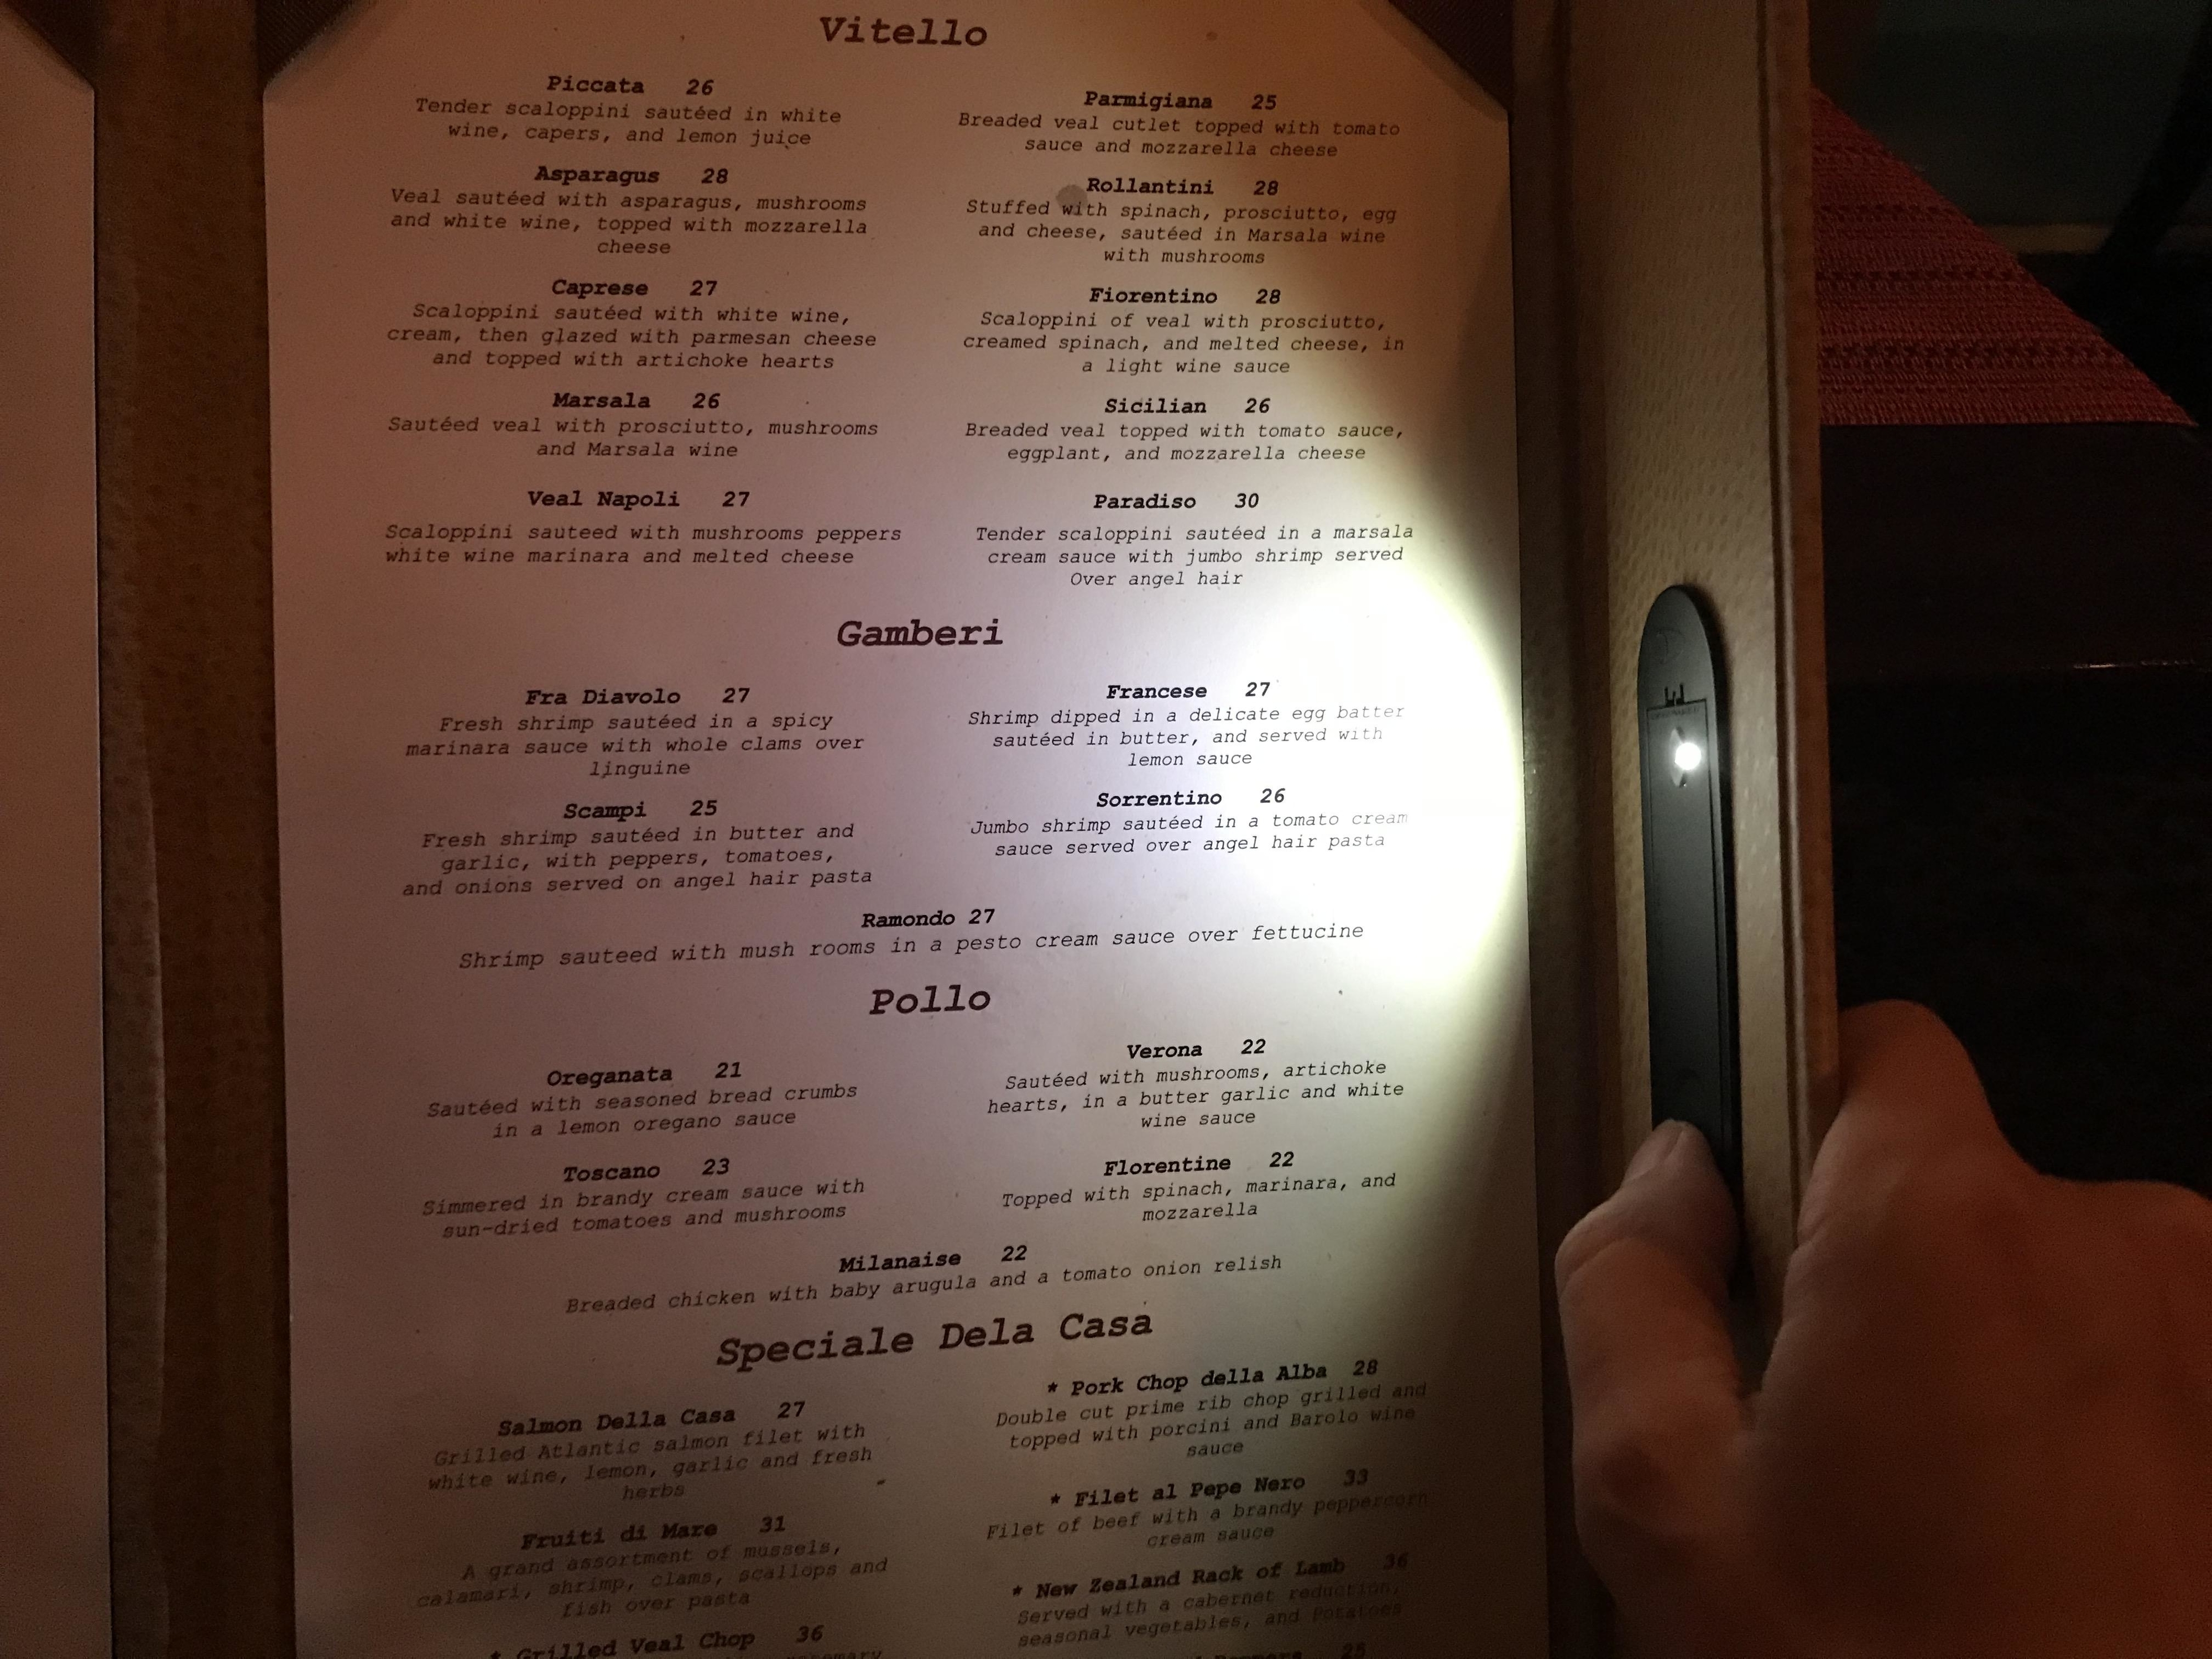 Menu with various Italian dishes in categories like Pizza, Vitello, and Speciale Dela Casa, person pointing at an item